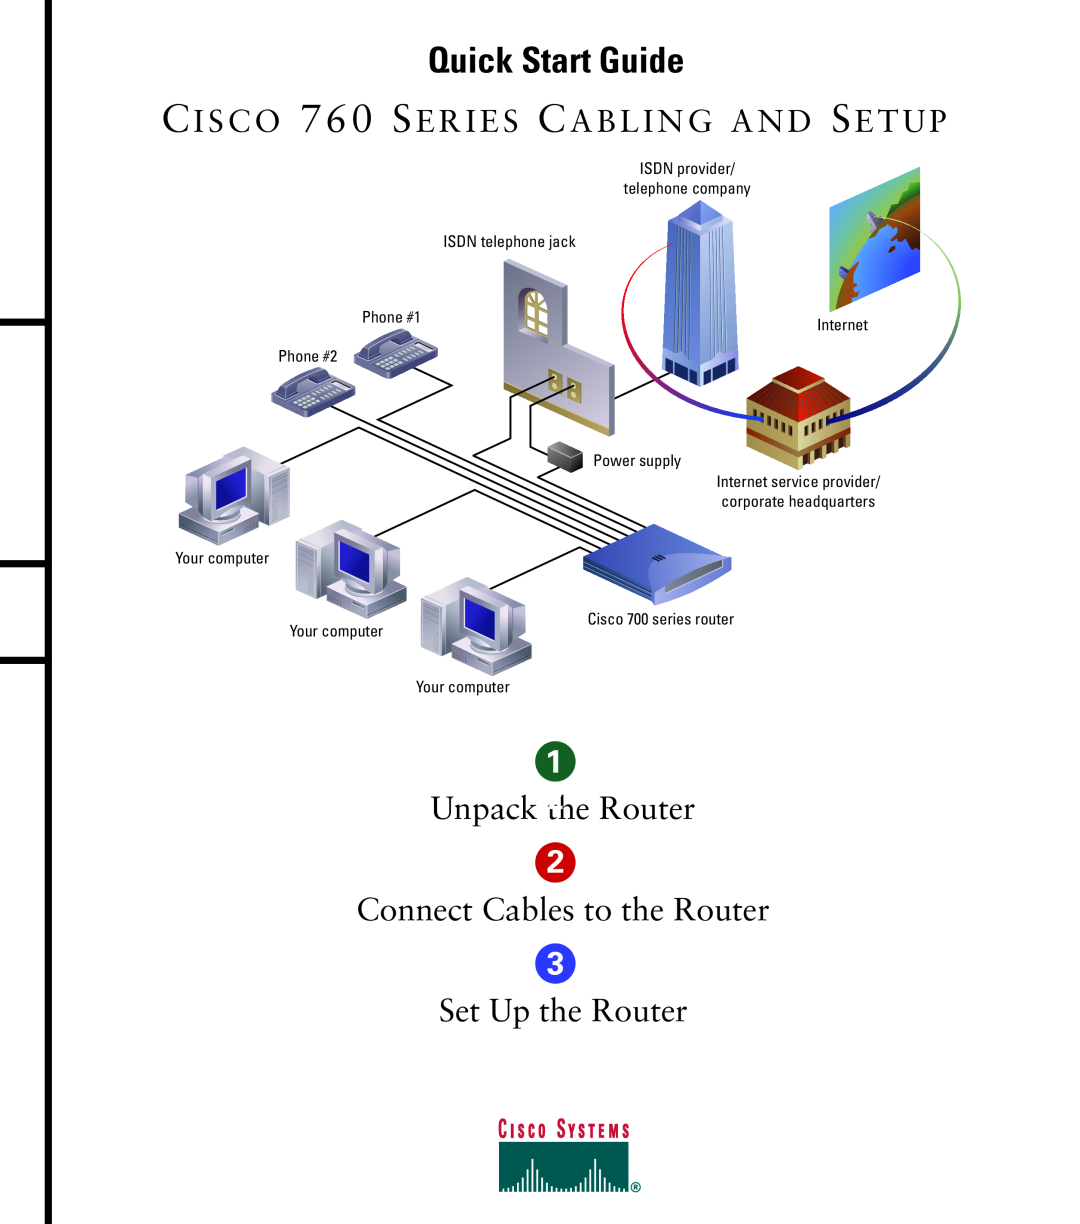 Cisco Systems 760 quick start Quick Start Guide, Unpack the Router, Connect Cables to the Router, Set Up the Router 